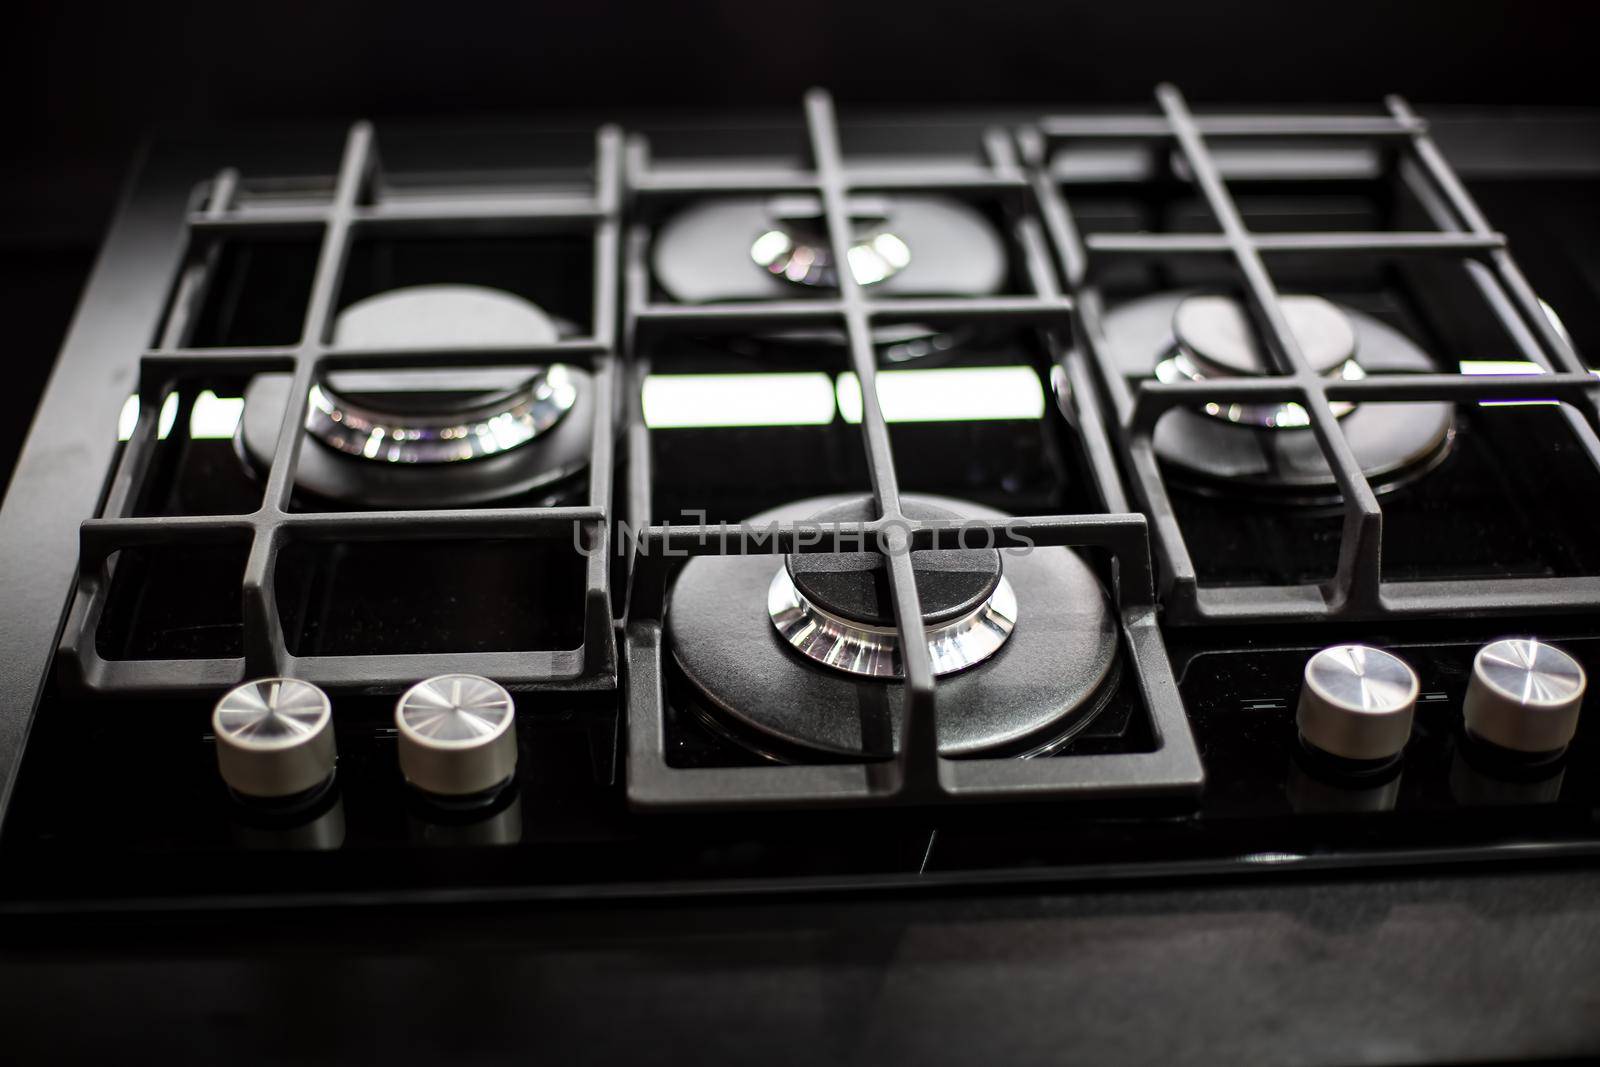 New modern black gas stove with four burners for the kitchen, stainless steel surface. Cast iron grates